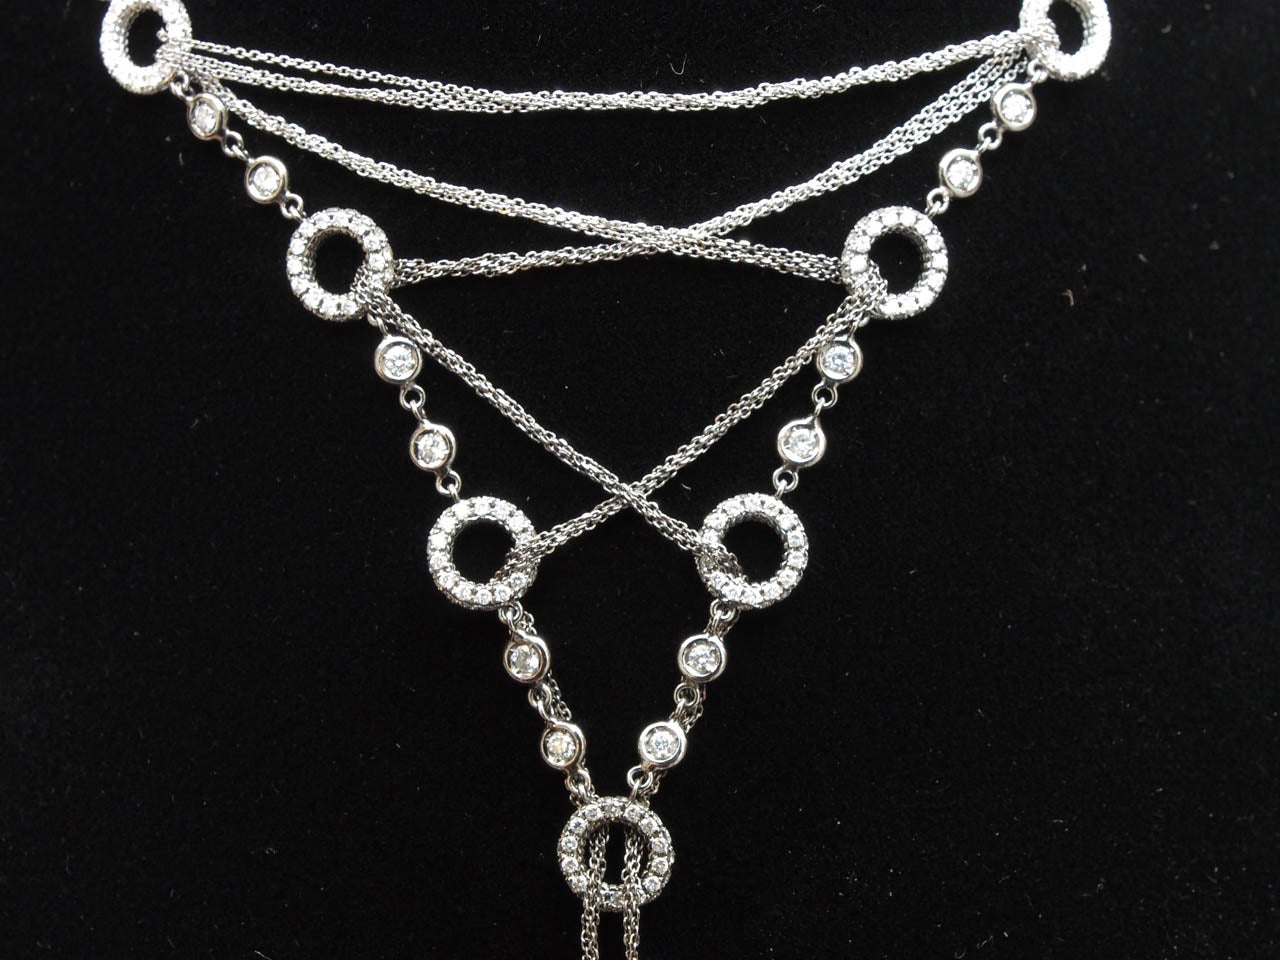 Women's Exceptional Black and White Diamond Necklace